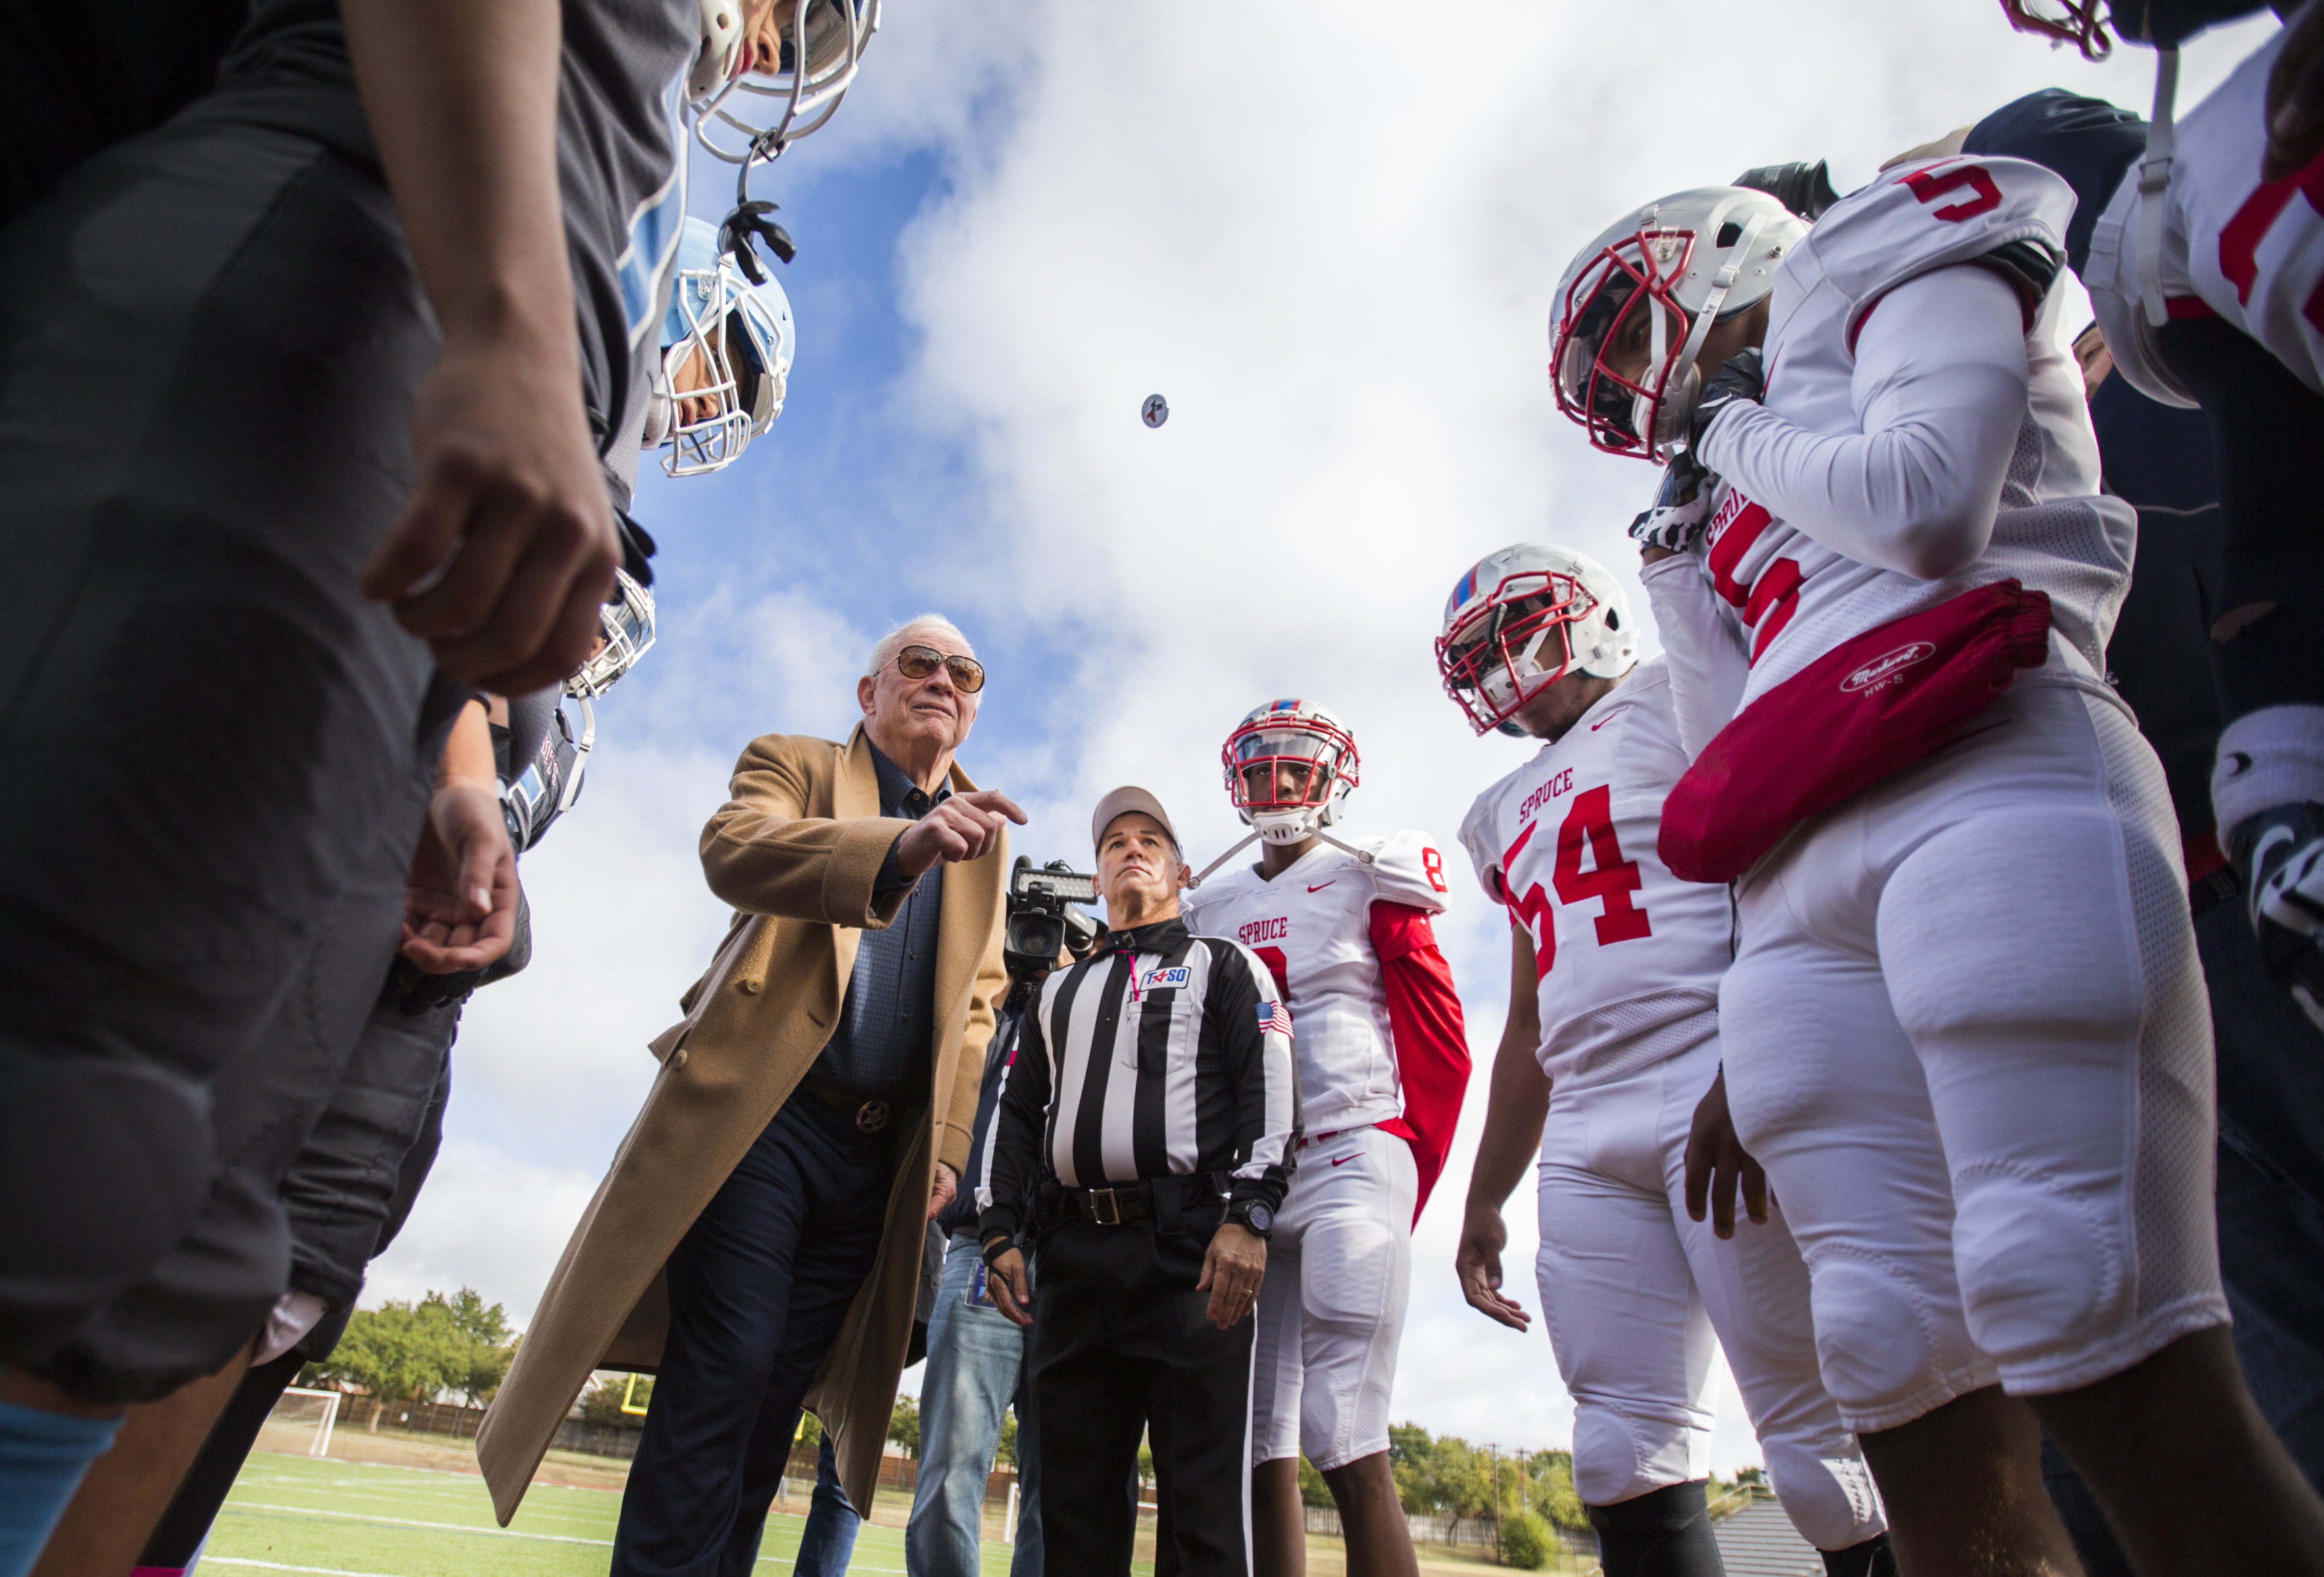 Dallas Cowboys Owner Jerry Jones performed the coin toss before Thomas Jefferson High School...